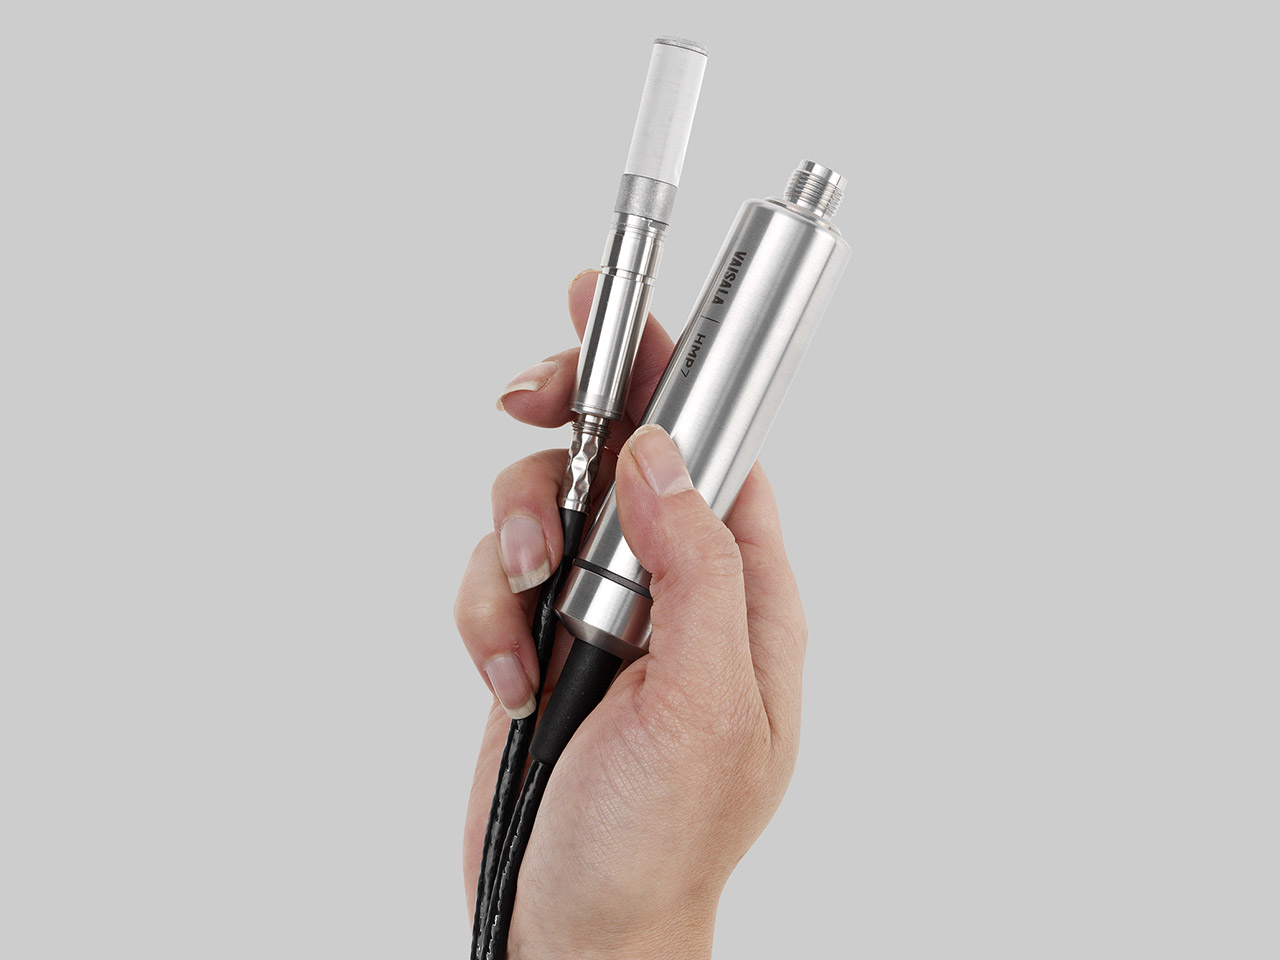 Vaisala HUMICAP® Humidity and Temperature Probe HMP7 is designed for applications which involve constant high humidity or rapid changes in humidity